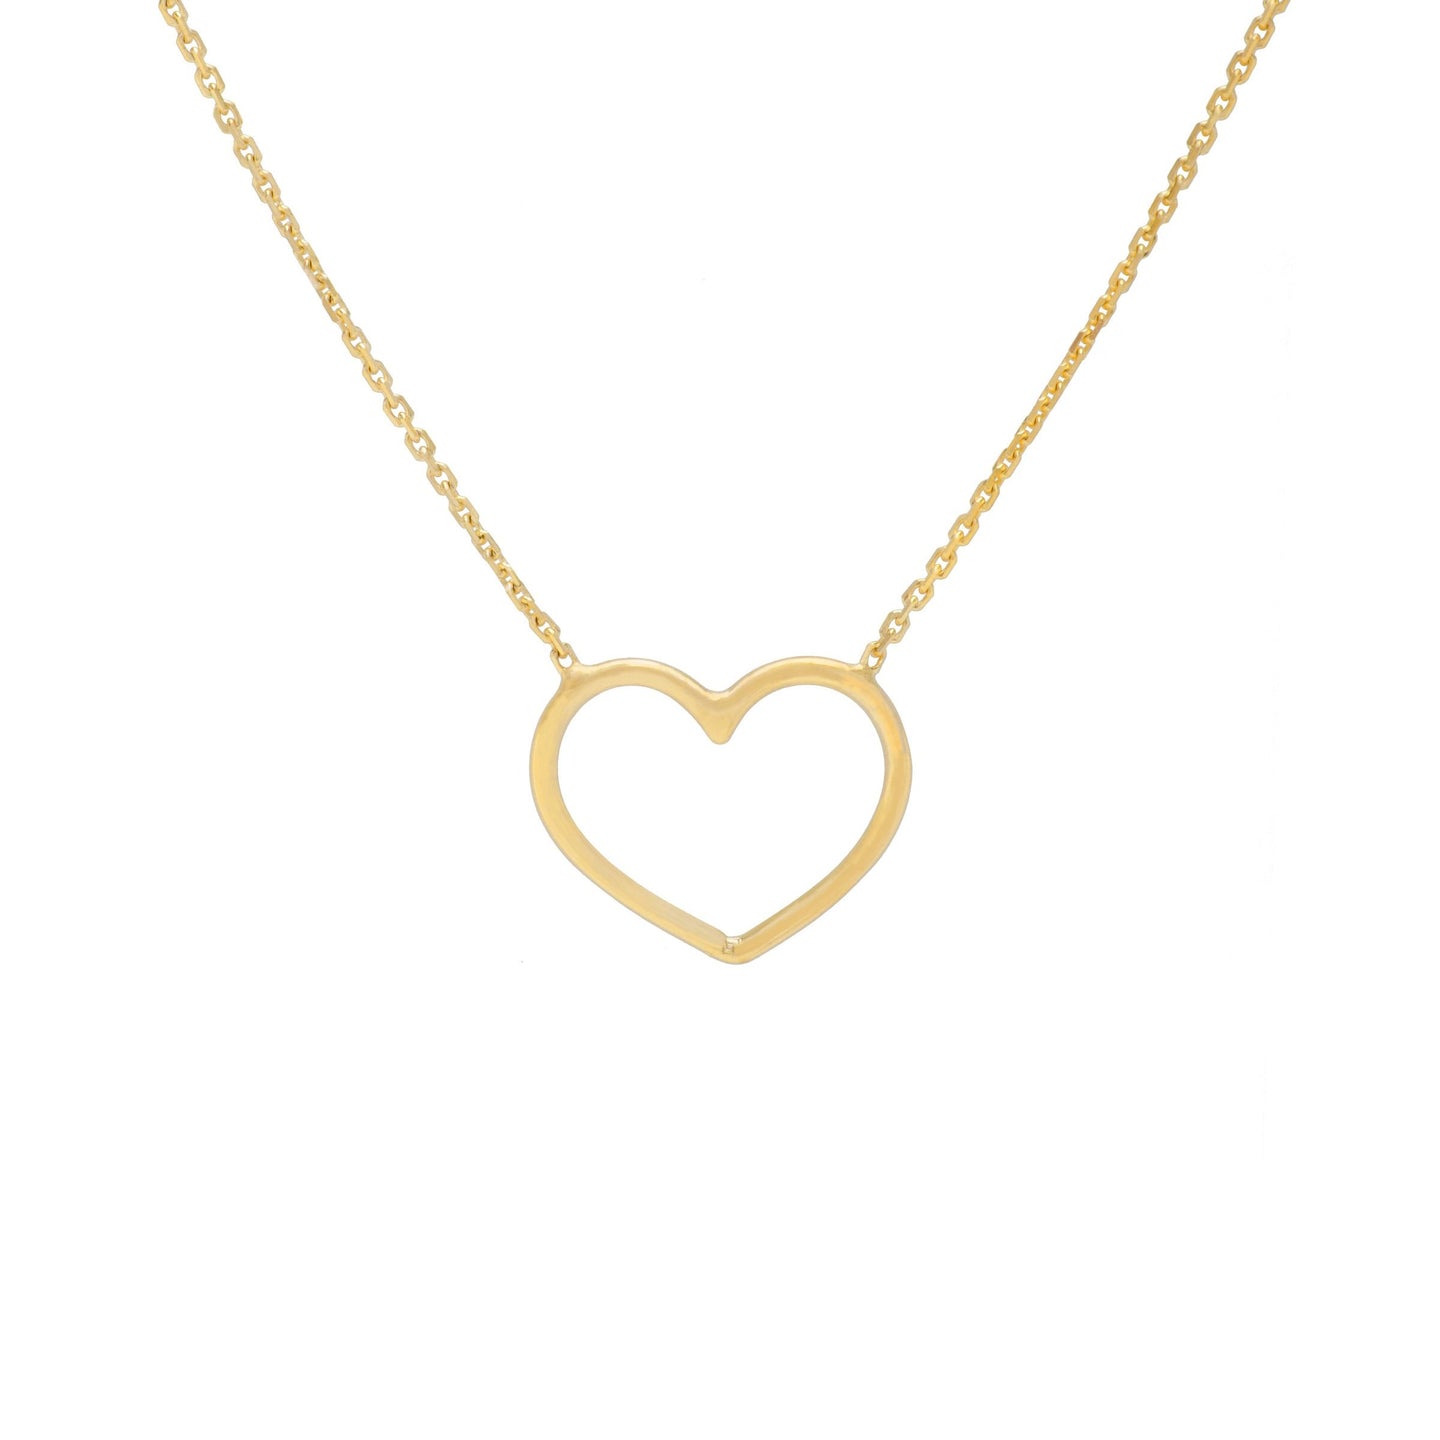 Sabel Everyday Collection 14K Yellow Gold Heart Necklace